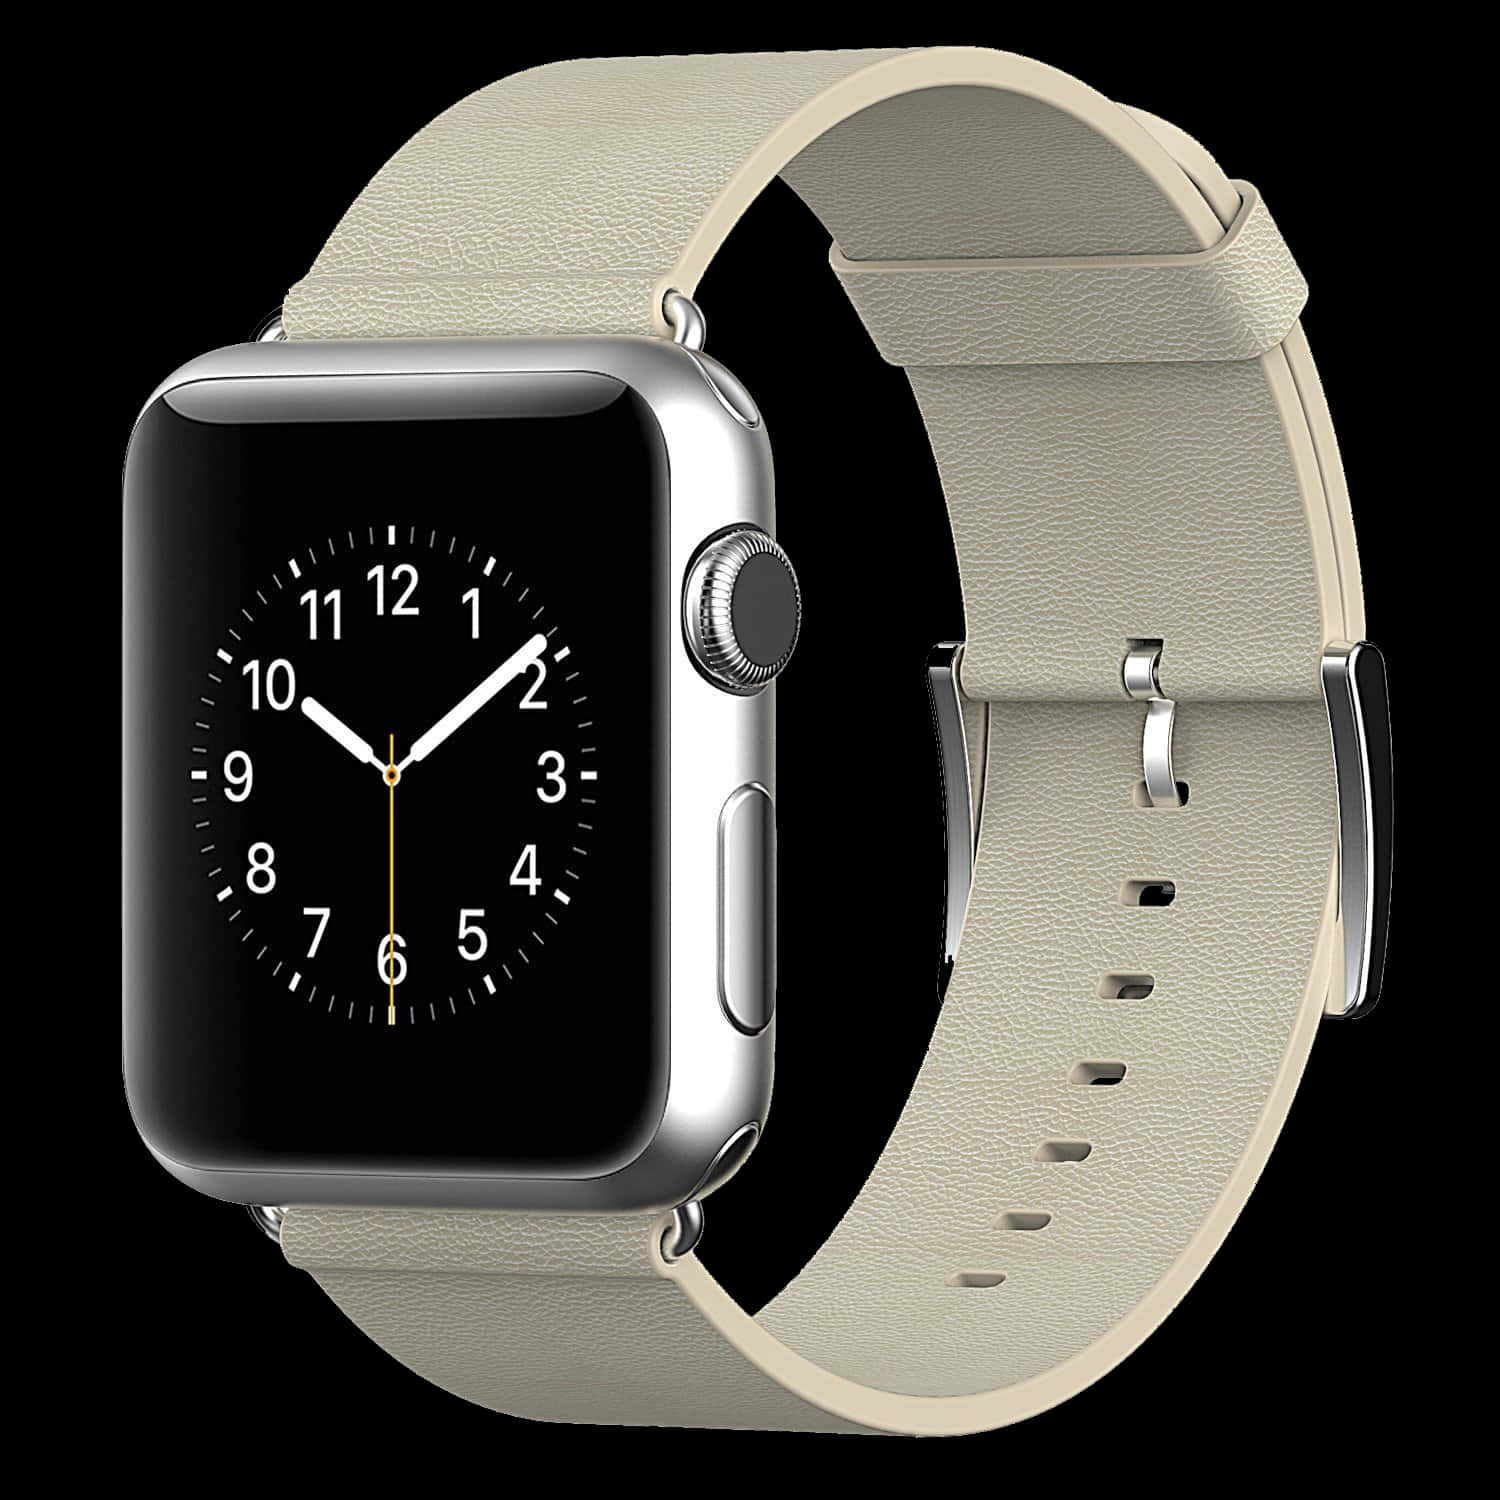 Be ahead of the trend with the Apple Watch, the world’s most innovative wearable device.